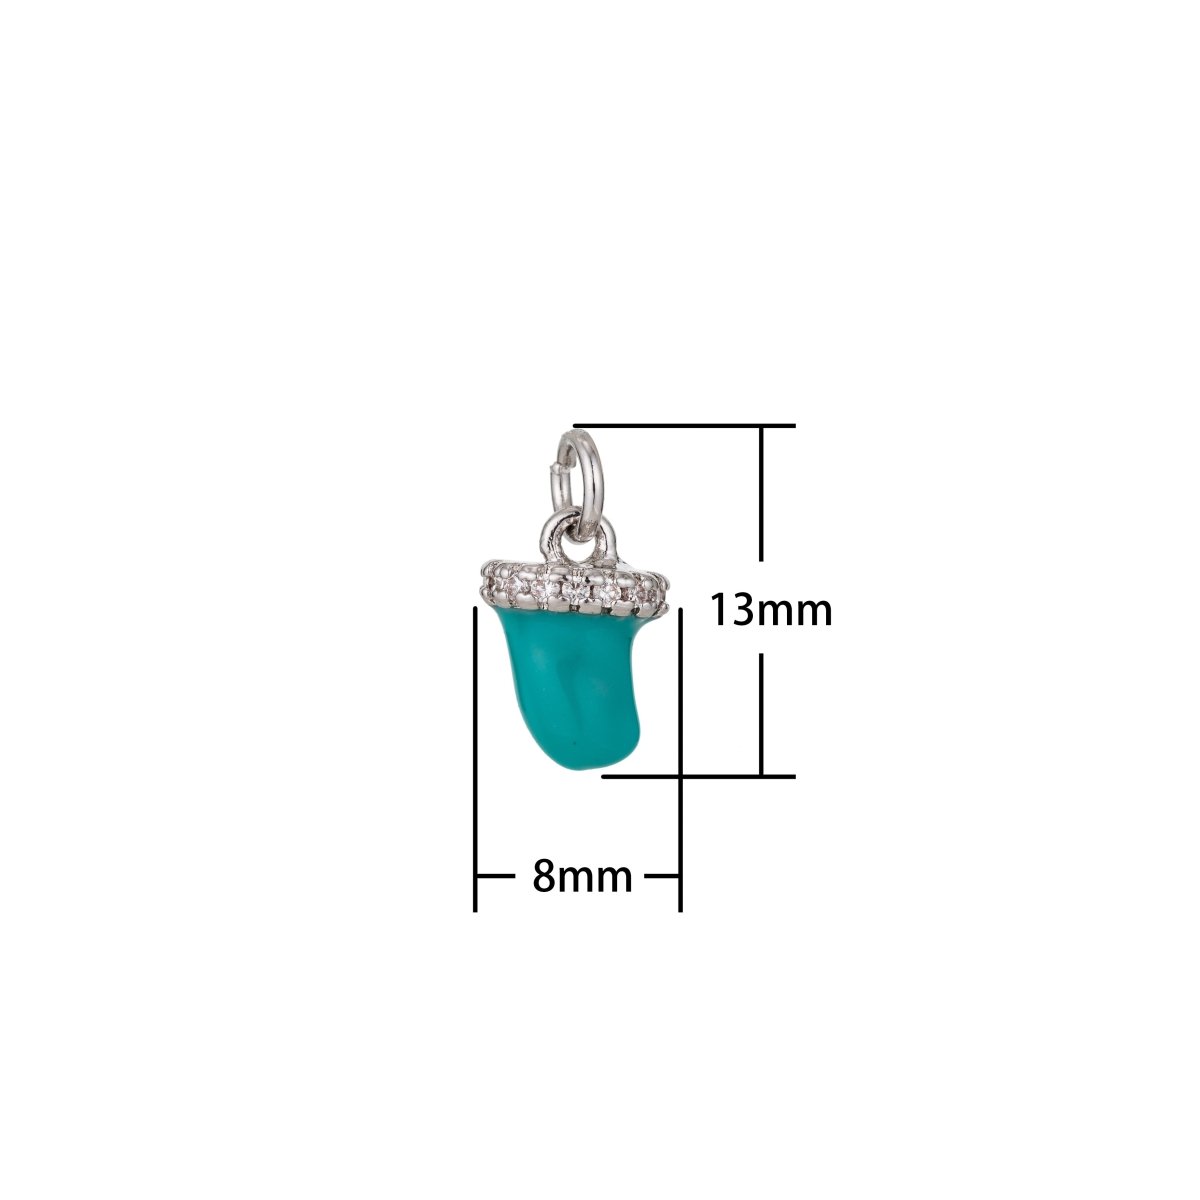 Delicate Mini Tusk Drop Charm Pendant, Dainty Horn Turquoise Charms with CZ for Bracelet Earring Necklace Jewelry Making Supply in Gold Fill C-433 - DLUXCA